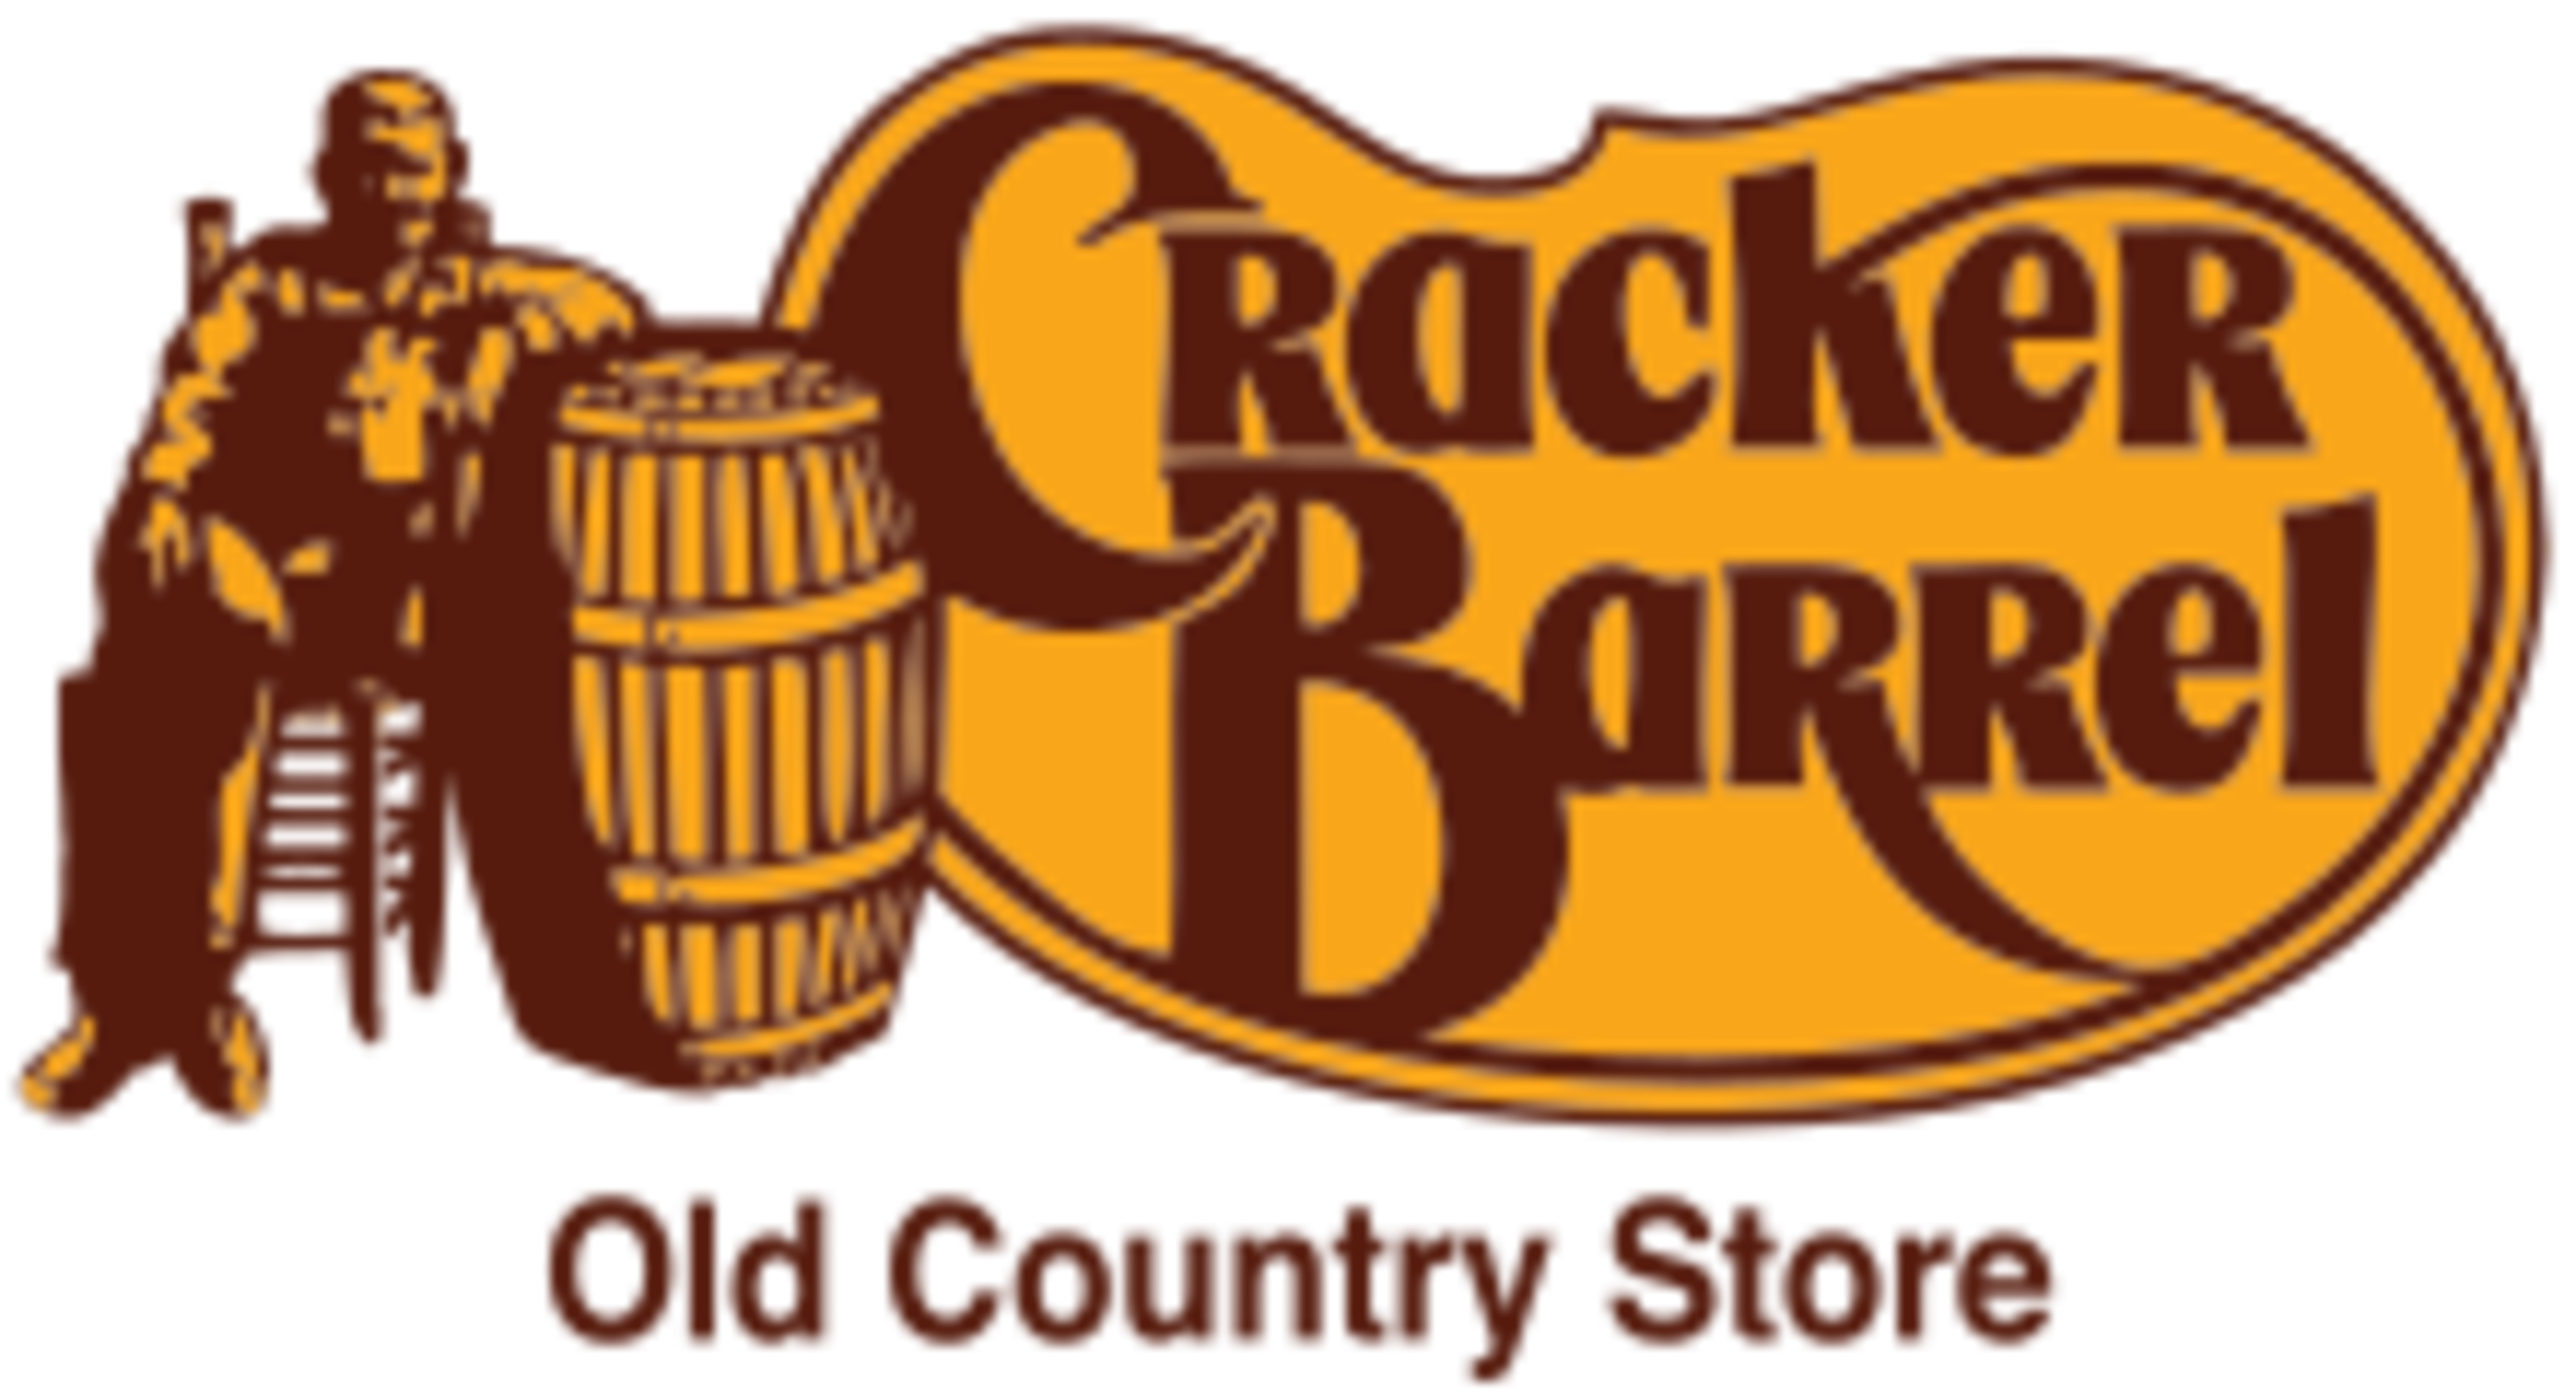 Cracker Barrel Old Country StoreCode